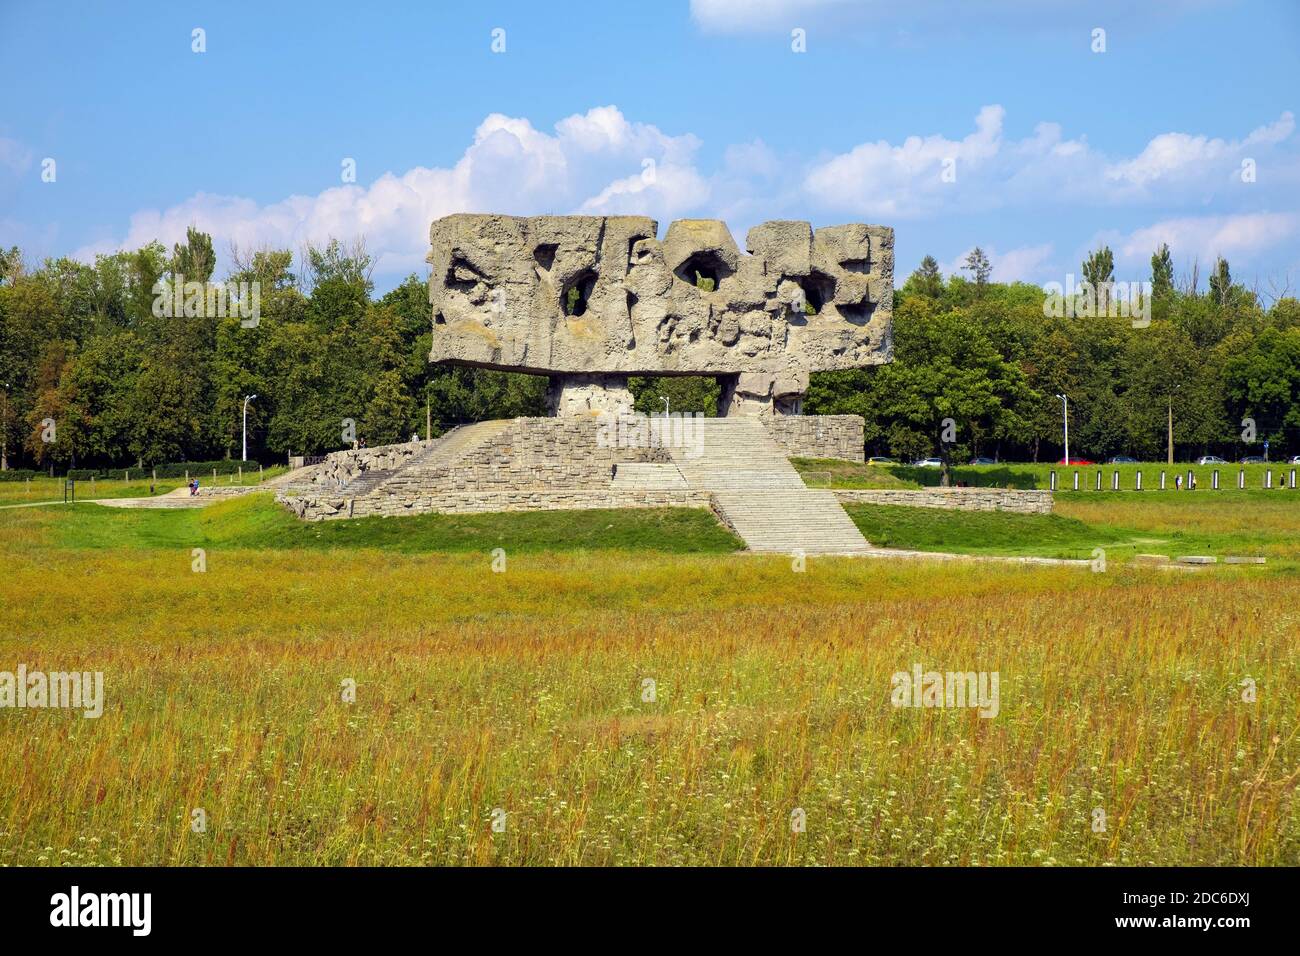 Lublin, Lubelskie / Poland - 2019/08/17: Panoramic view of the Majdanek KL Lublin Nazis concentration and extermination camp - Konzentrationslager Lub Stock Photo